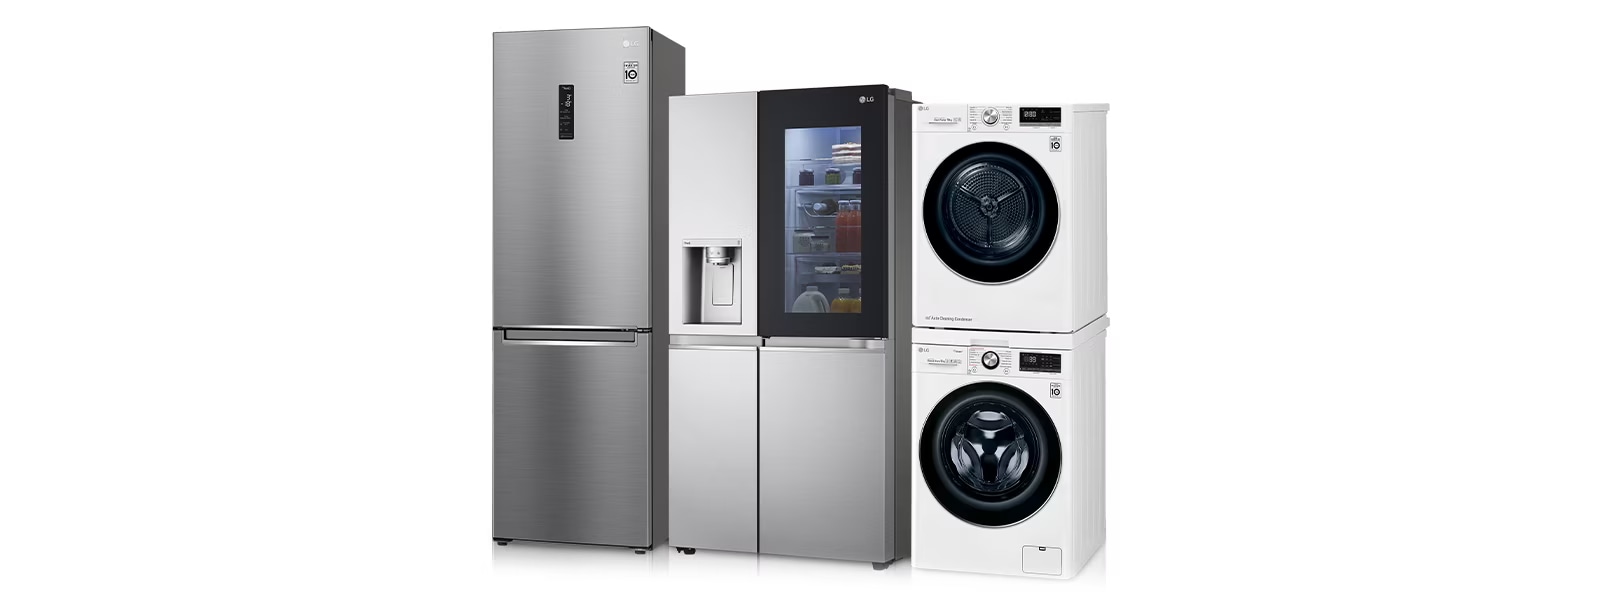 An image of a laundry room with LG Washing Machine and LG Dryer.